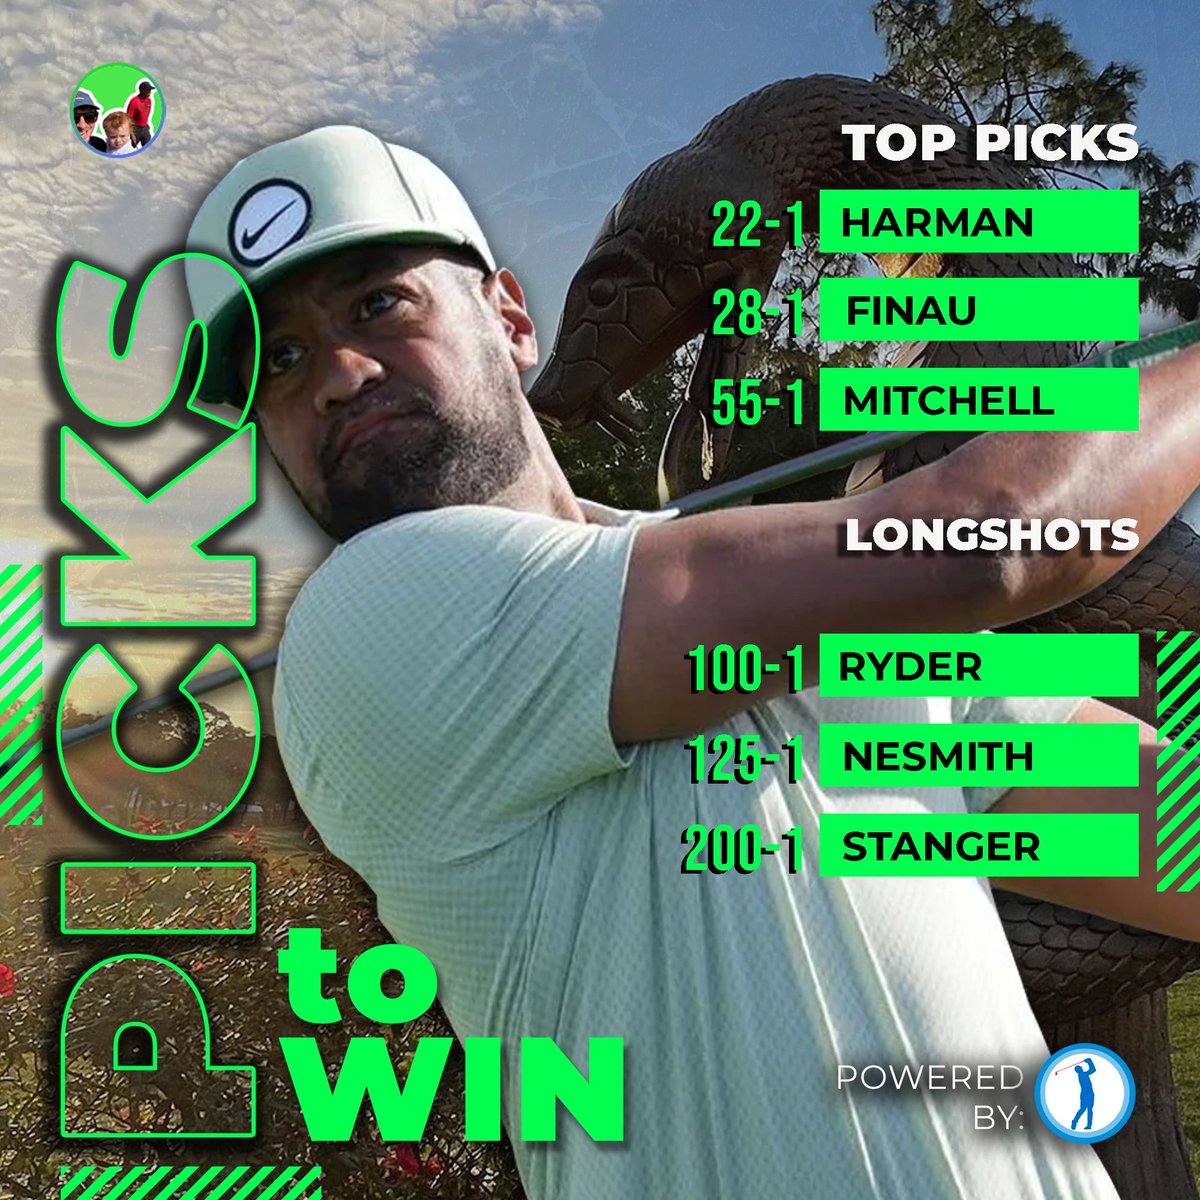 Here are my Picks to Win the #ValsparChampionship 

Good luck gang 🎲🎲⛳️